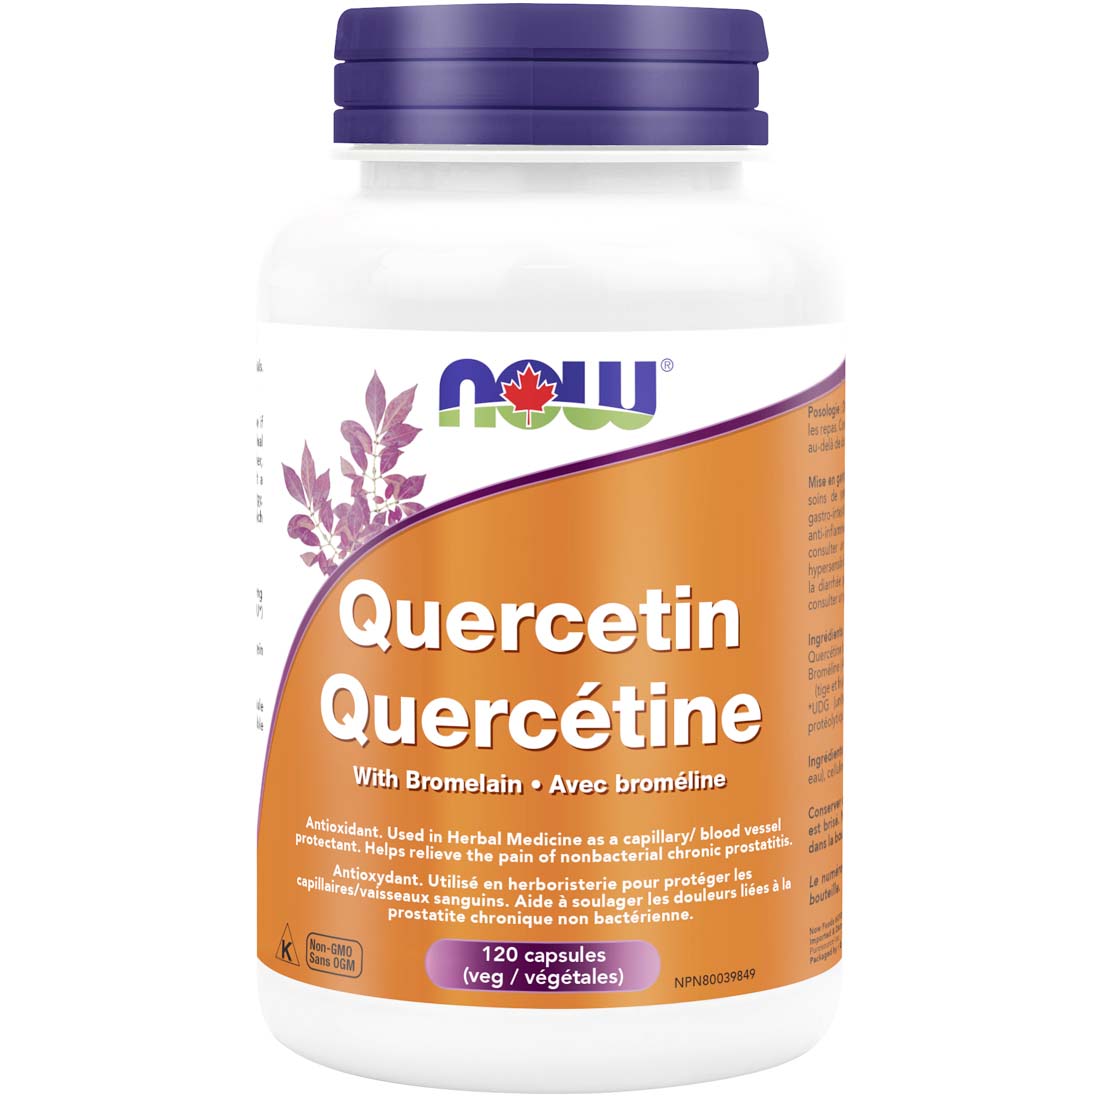 NOW Quercetin with Bromelain